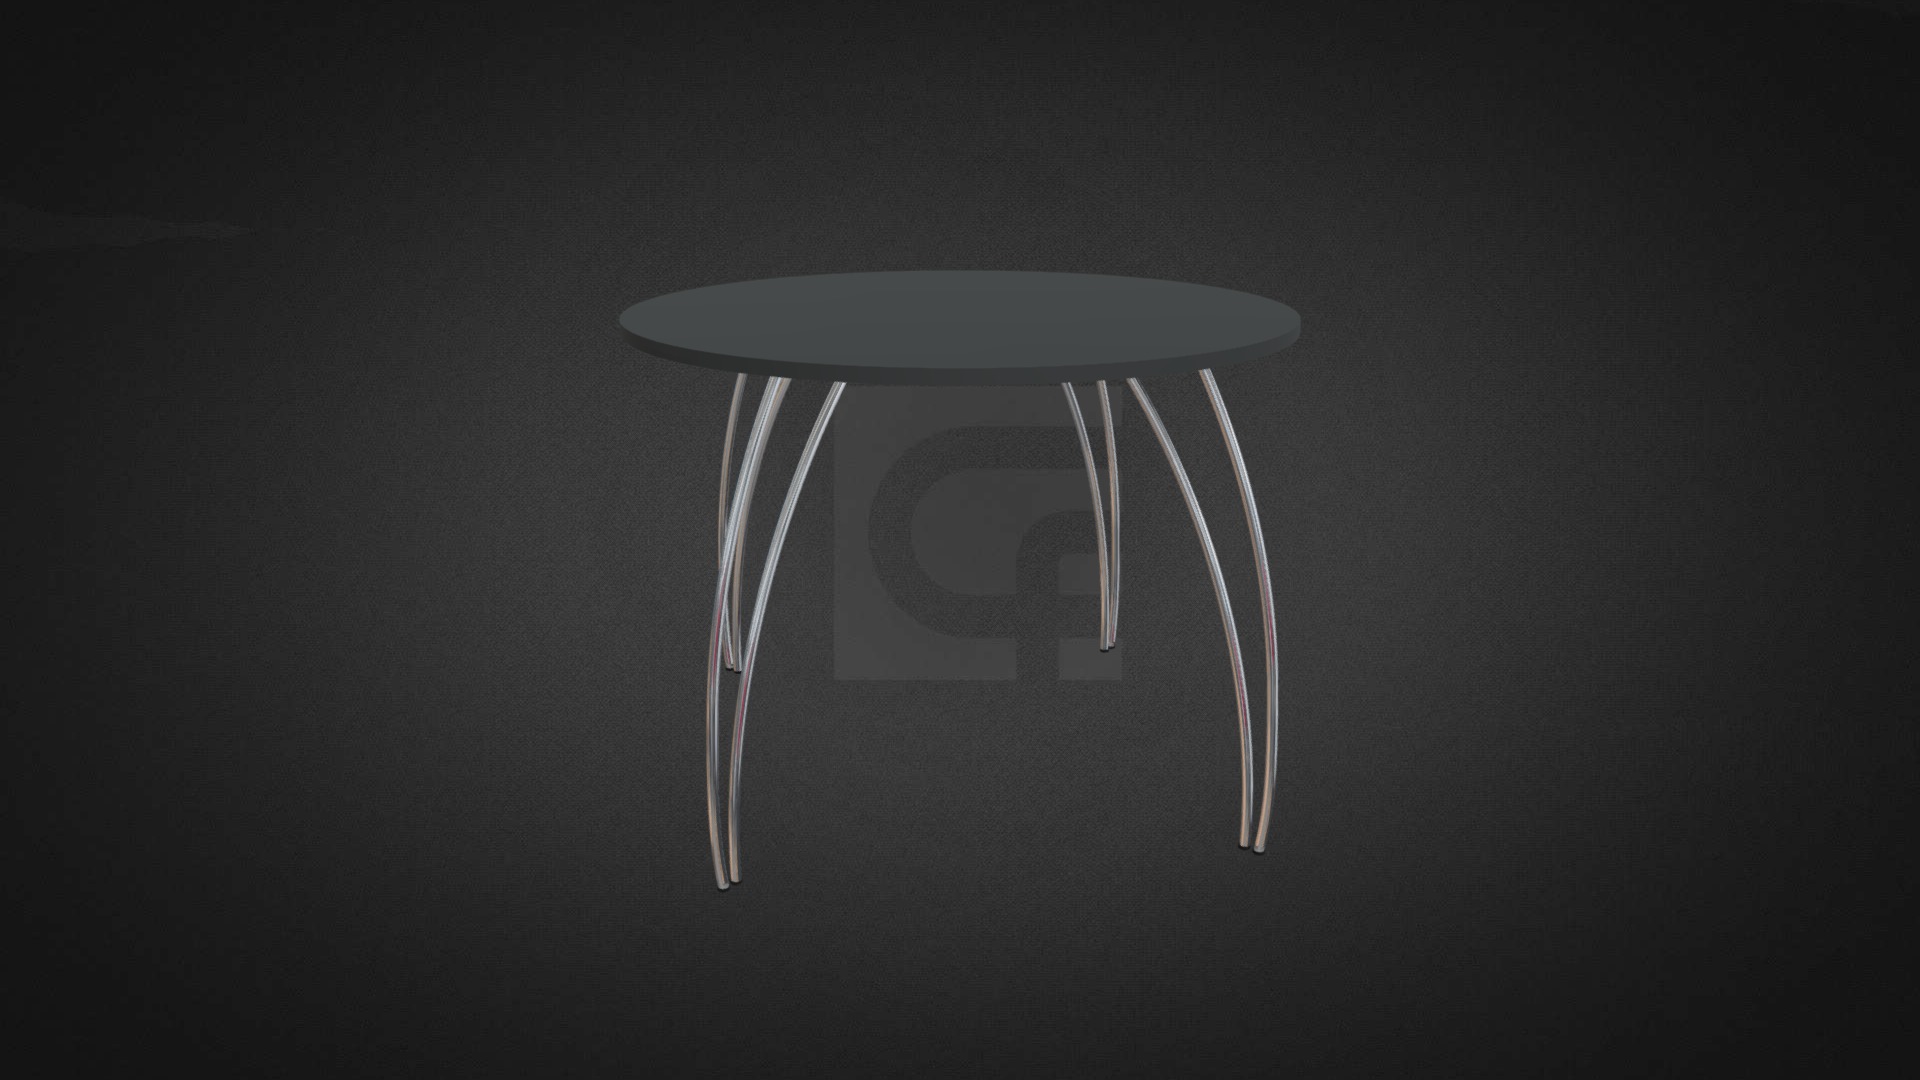 3D model Spider Meeting Hire - This is a 3D model of the Spider Meeting Hire. The 3D model is about a round white table with a white circle on it.